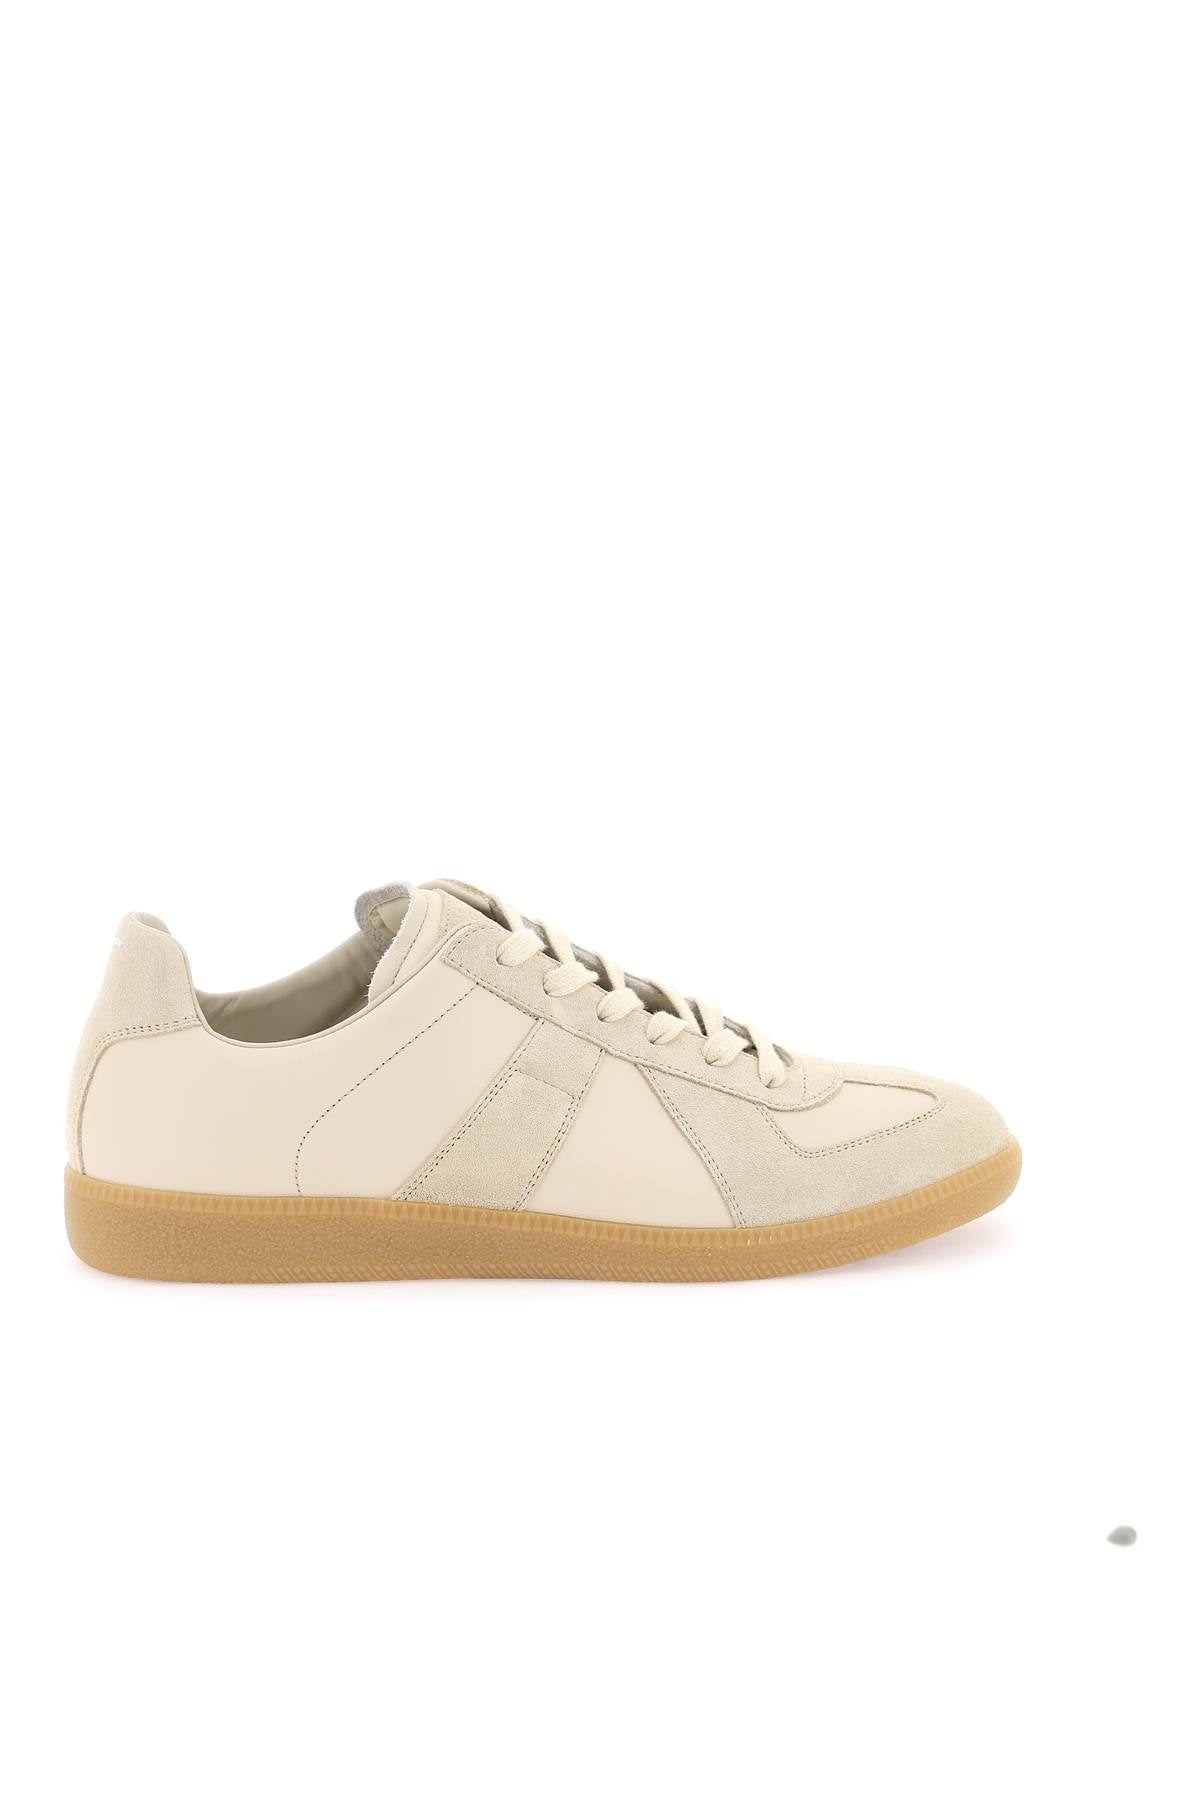 Beige Leather Sneakers with Suede Inserts and Rubber Sole